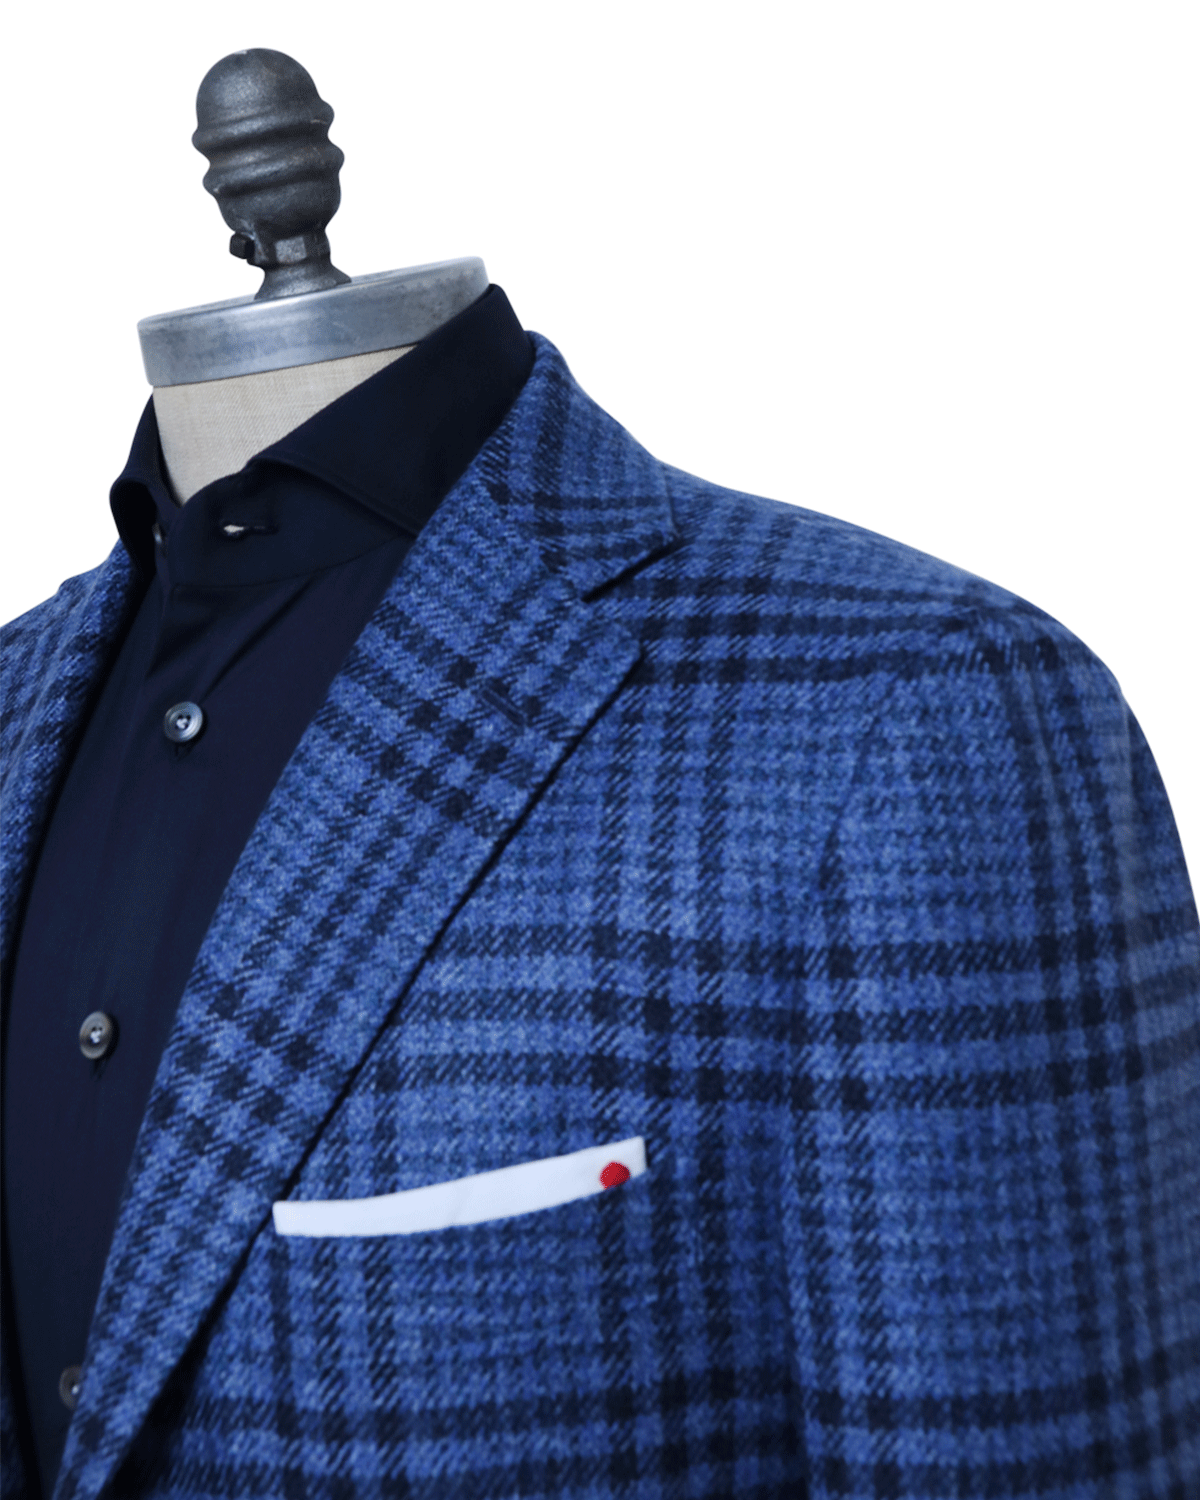 Light Blue with Navy Windowpane Cashmere Sportcoat